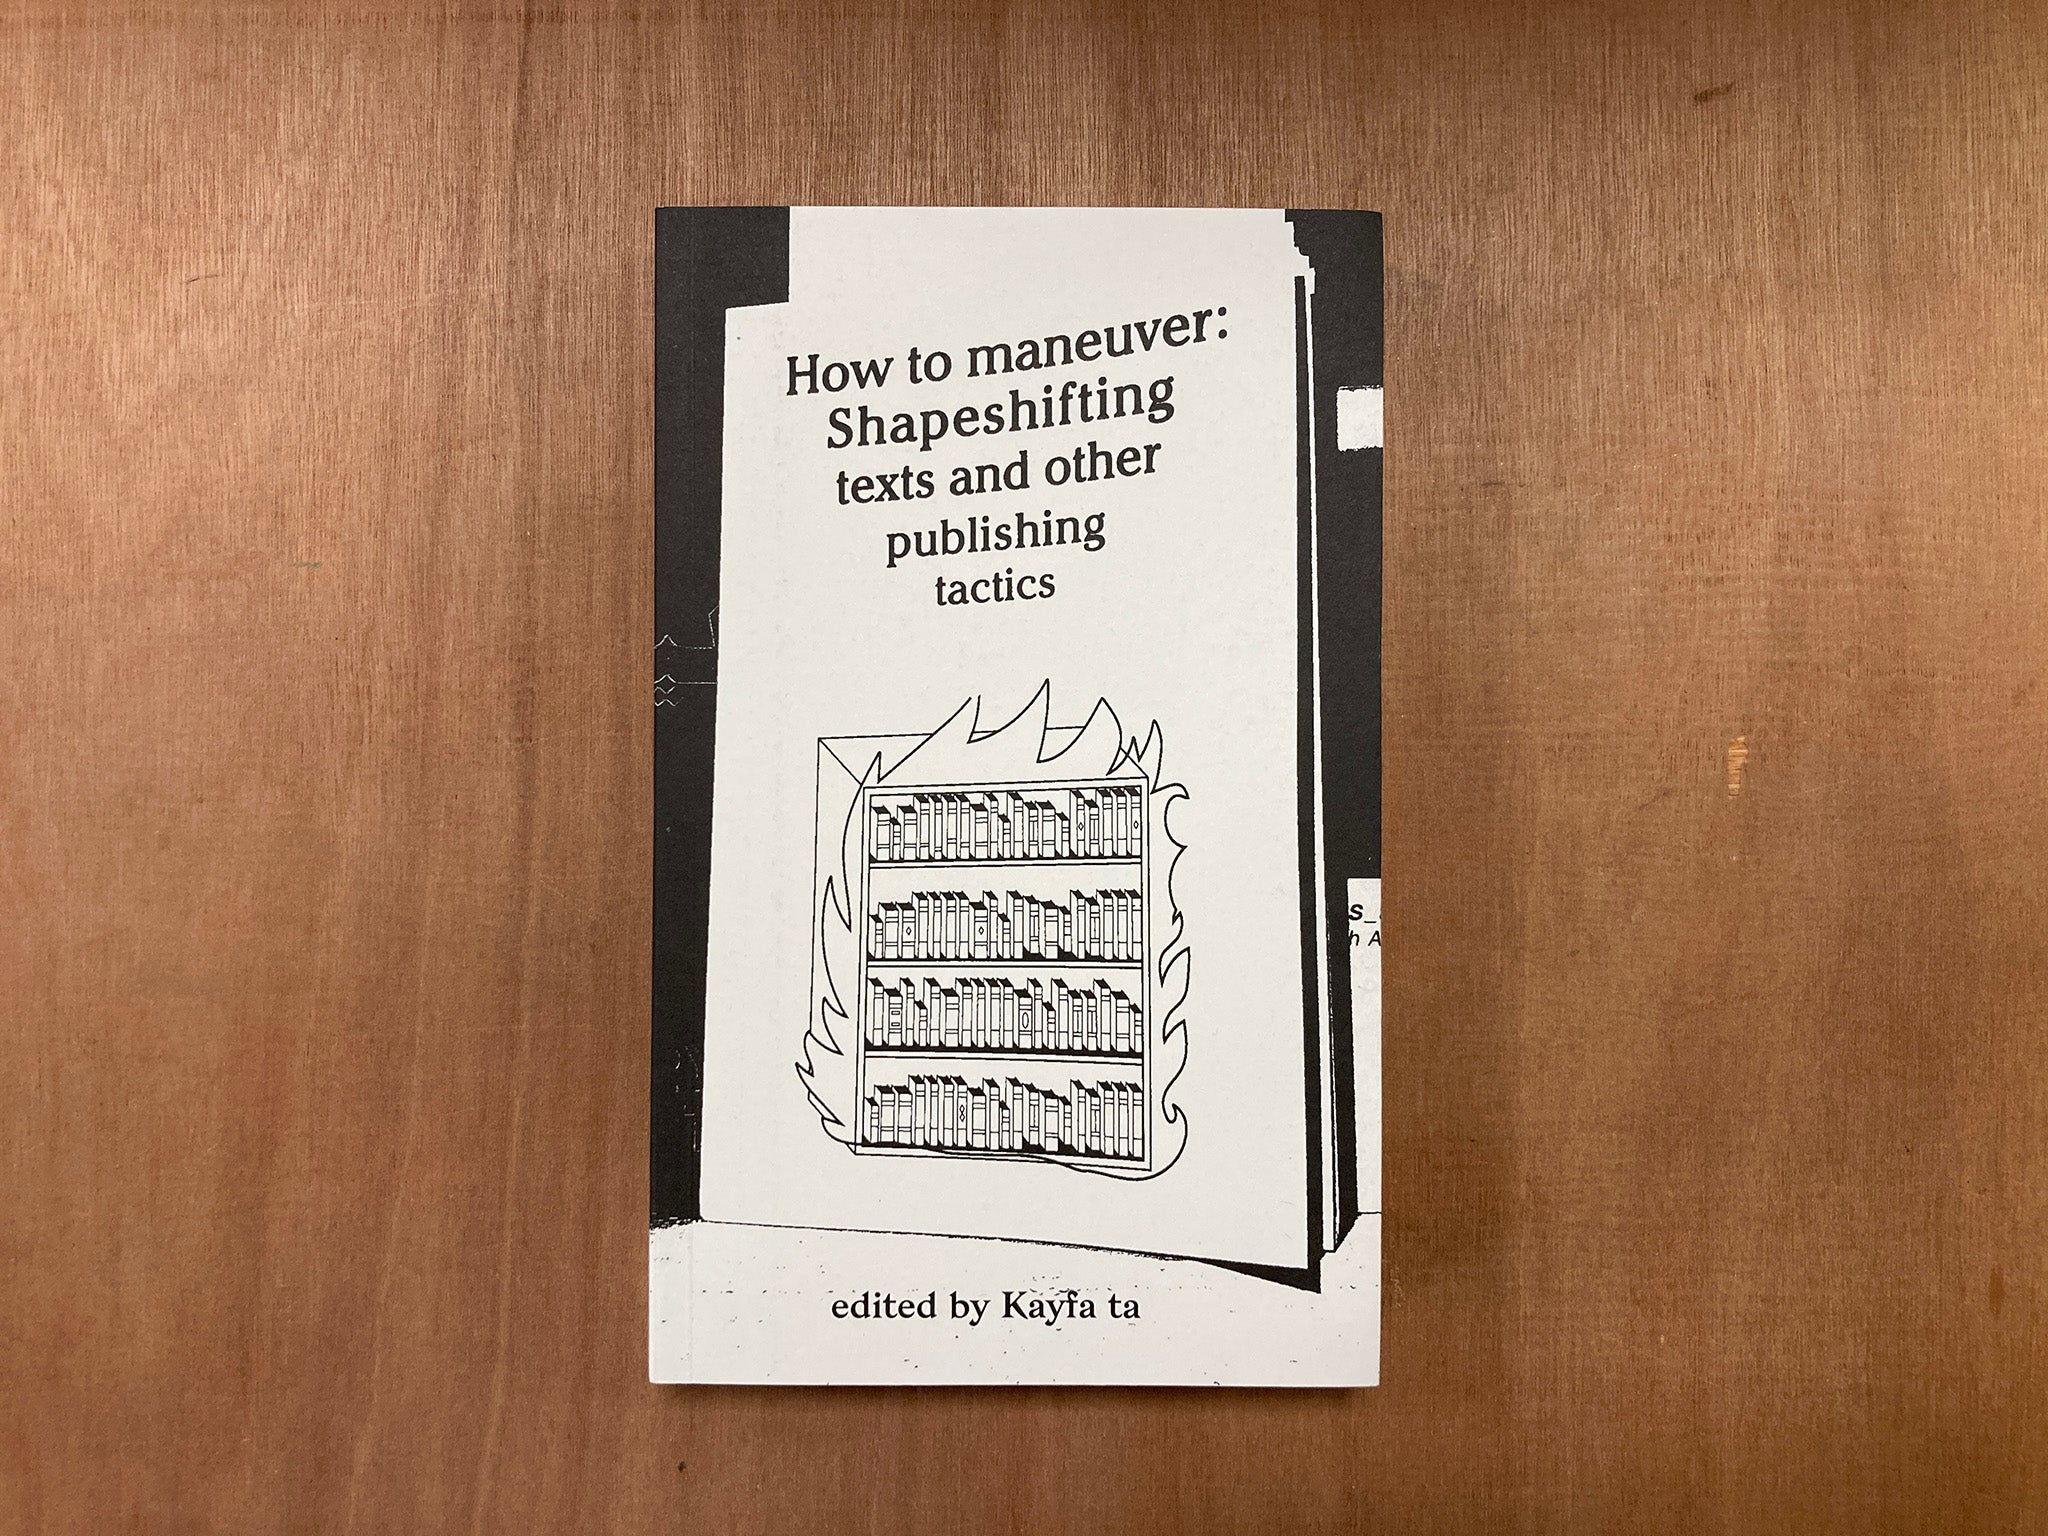 HOW TO MANEUVER: SHAPESHIFTING TEXTS AND OTHER PUBLISHING TACTICS